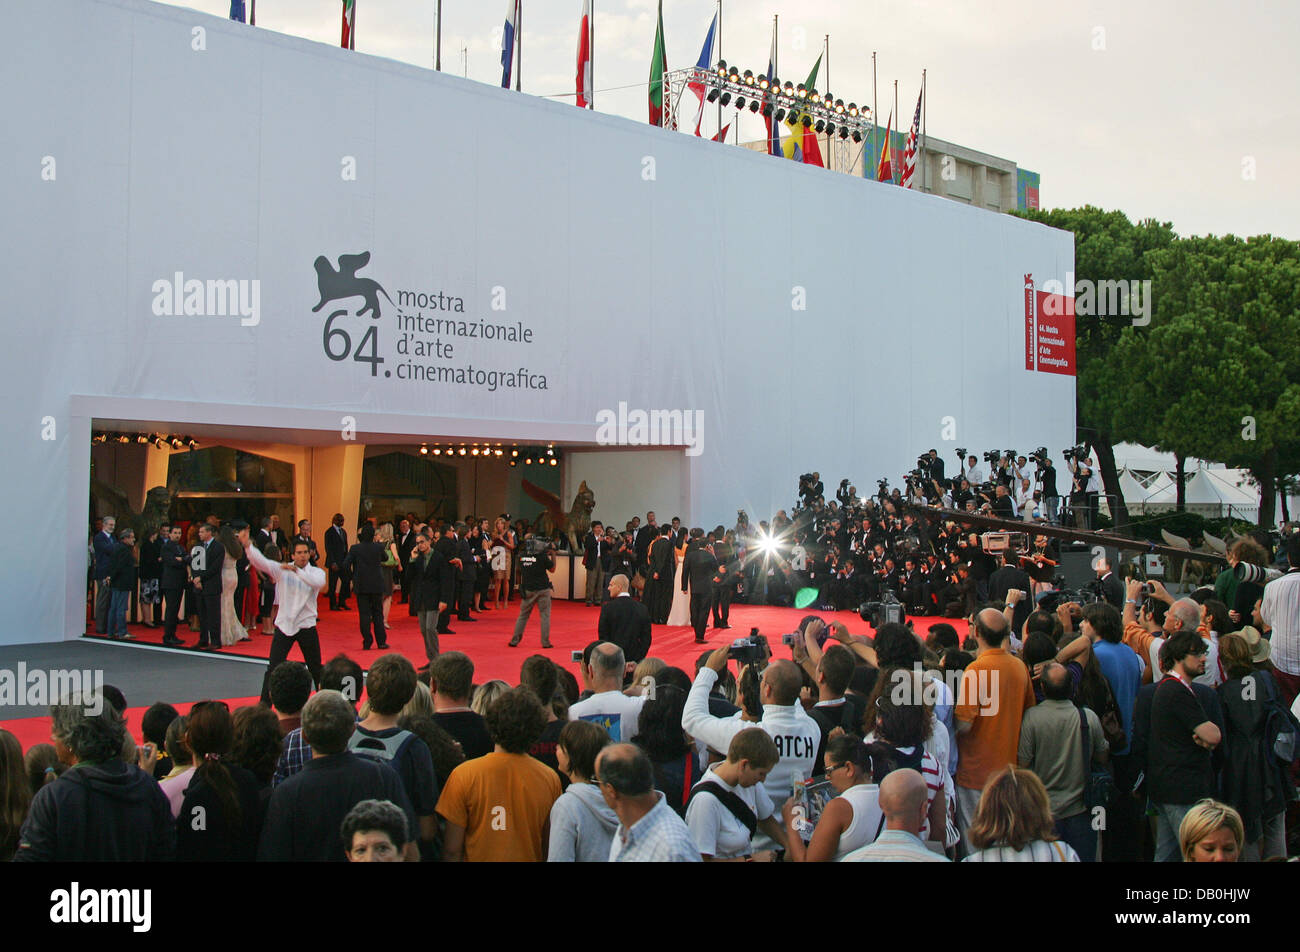 Fans and photographers crowd the Palazzo del Cinema during the premiere of Ang Lee's new film 'Lust, Caution' at the 64th Venice International Film Festival in Venice, Italy, 30 August 2007. Photo: Hubert Boesl Stock Photo